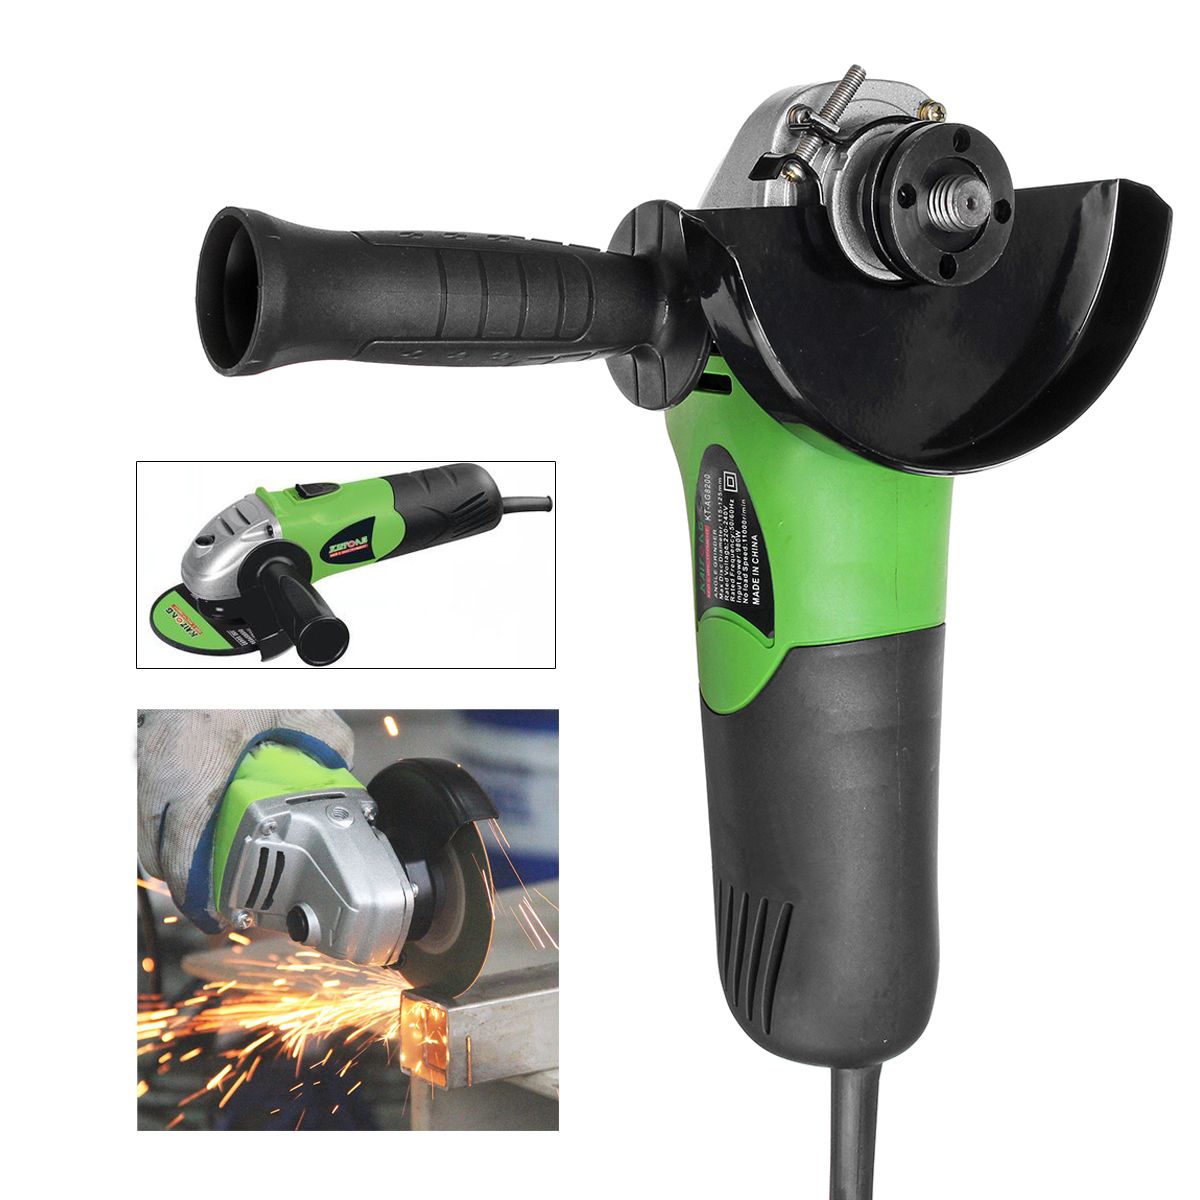 11000RPM-980W-Electric-Angle-Grinder-125mm-Grinding-Machine-Metal-Cutting-Tool-1435266